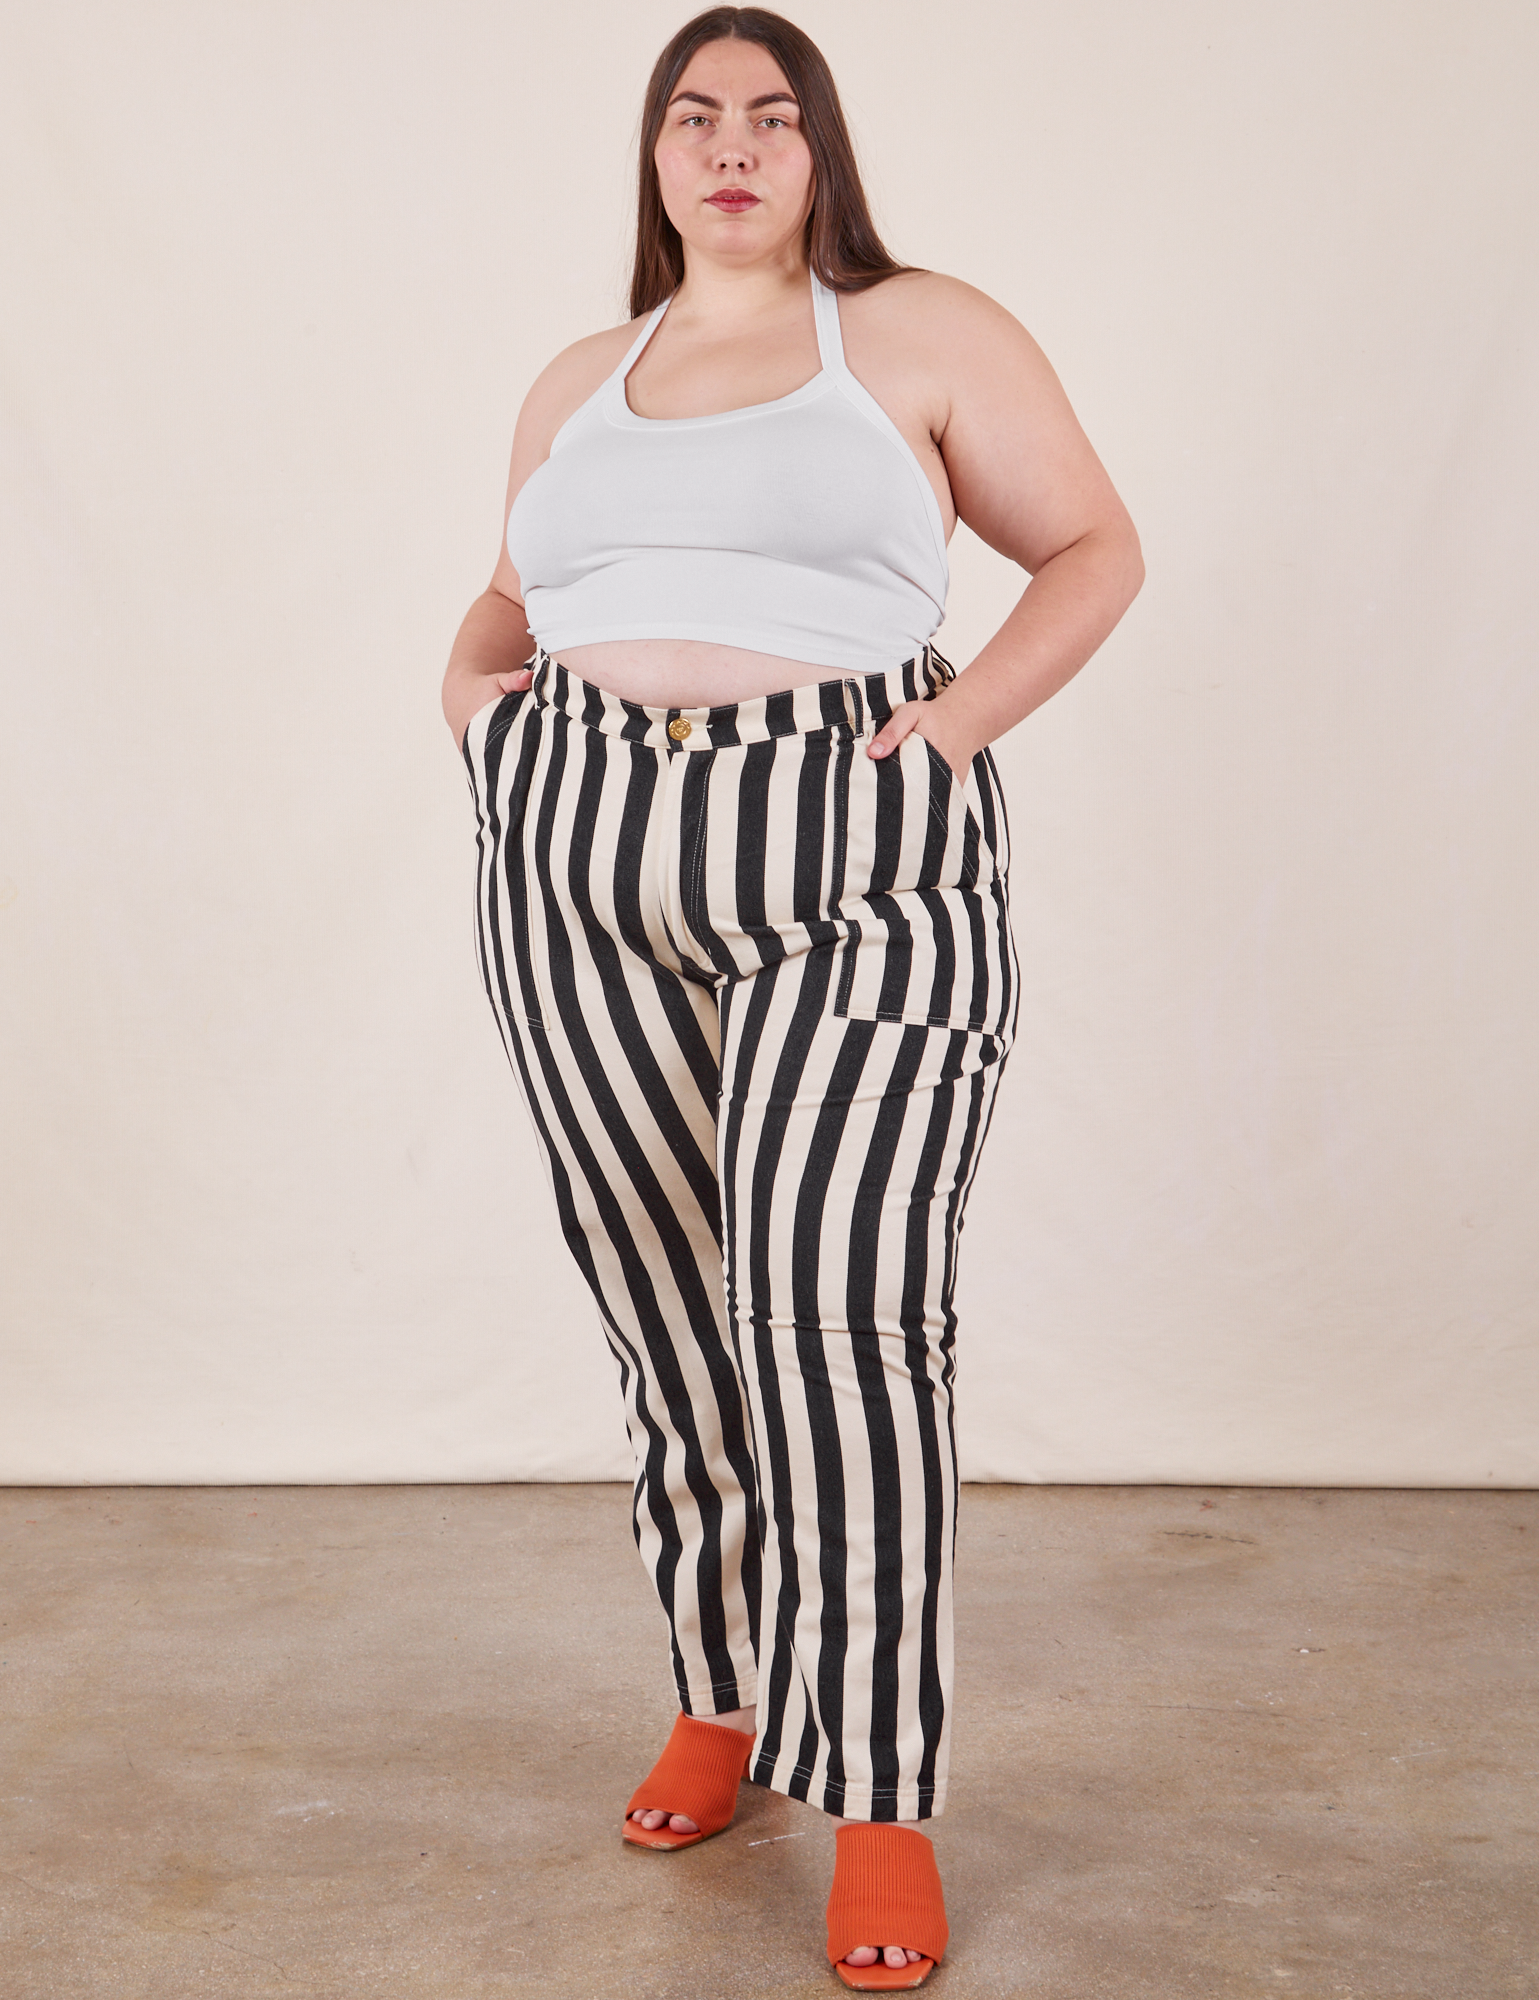 Marielena is 5&#39;8&quot; and wearing 2XL Black Striped Work Pants in White paired with vintage off-white Halter Top